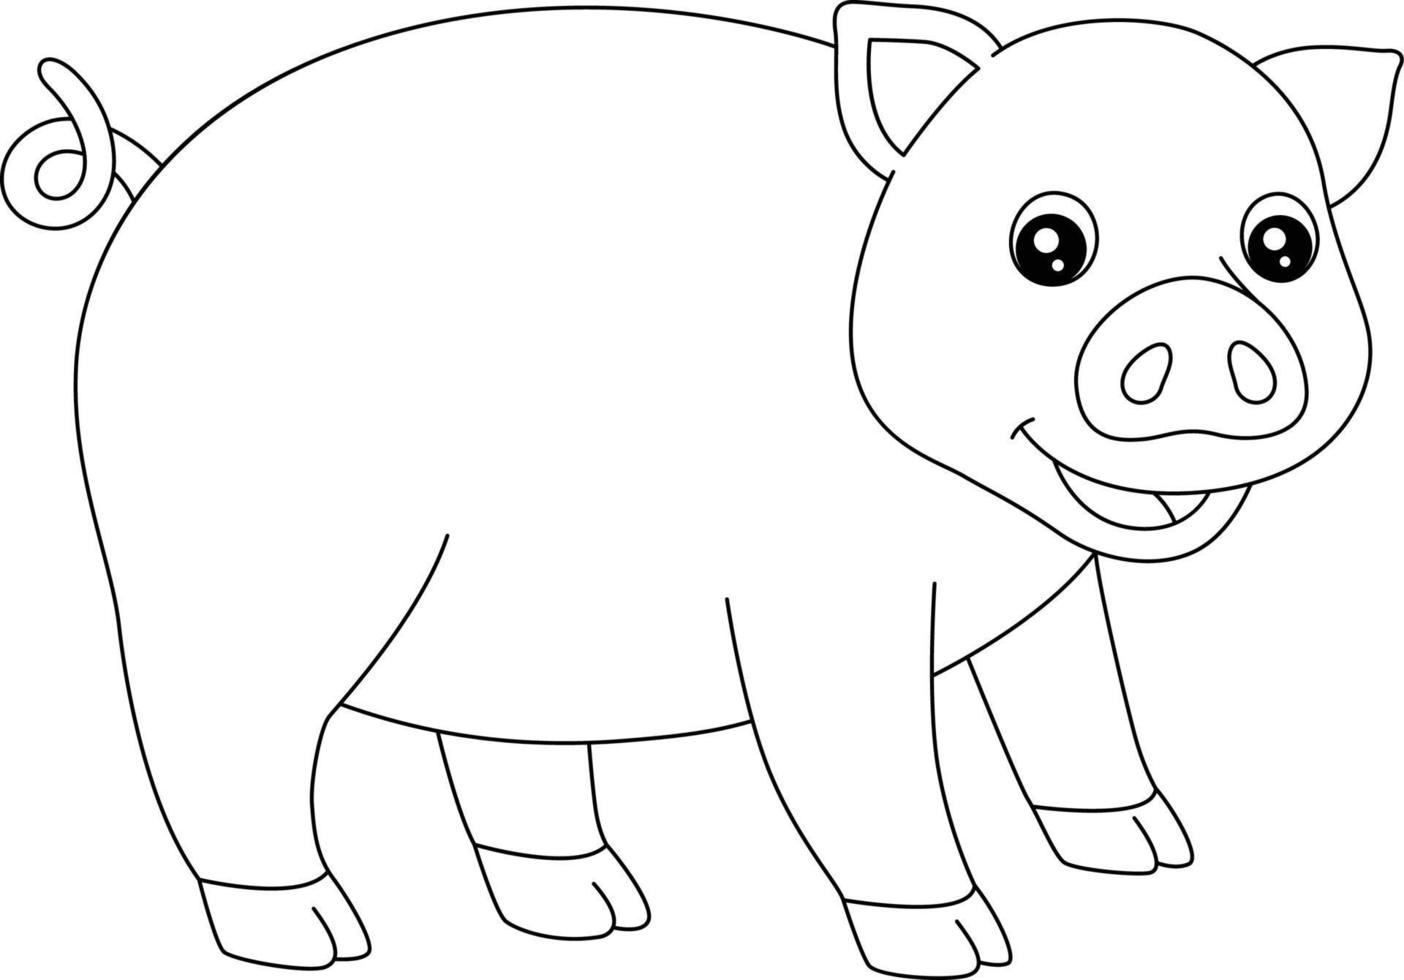 Pig Coloring Page Isolated for Kids vector